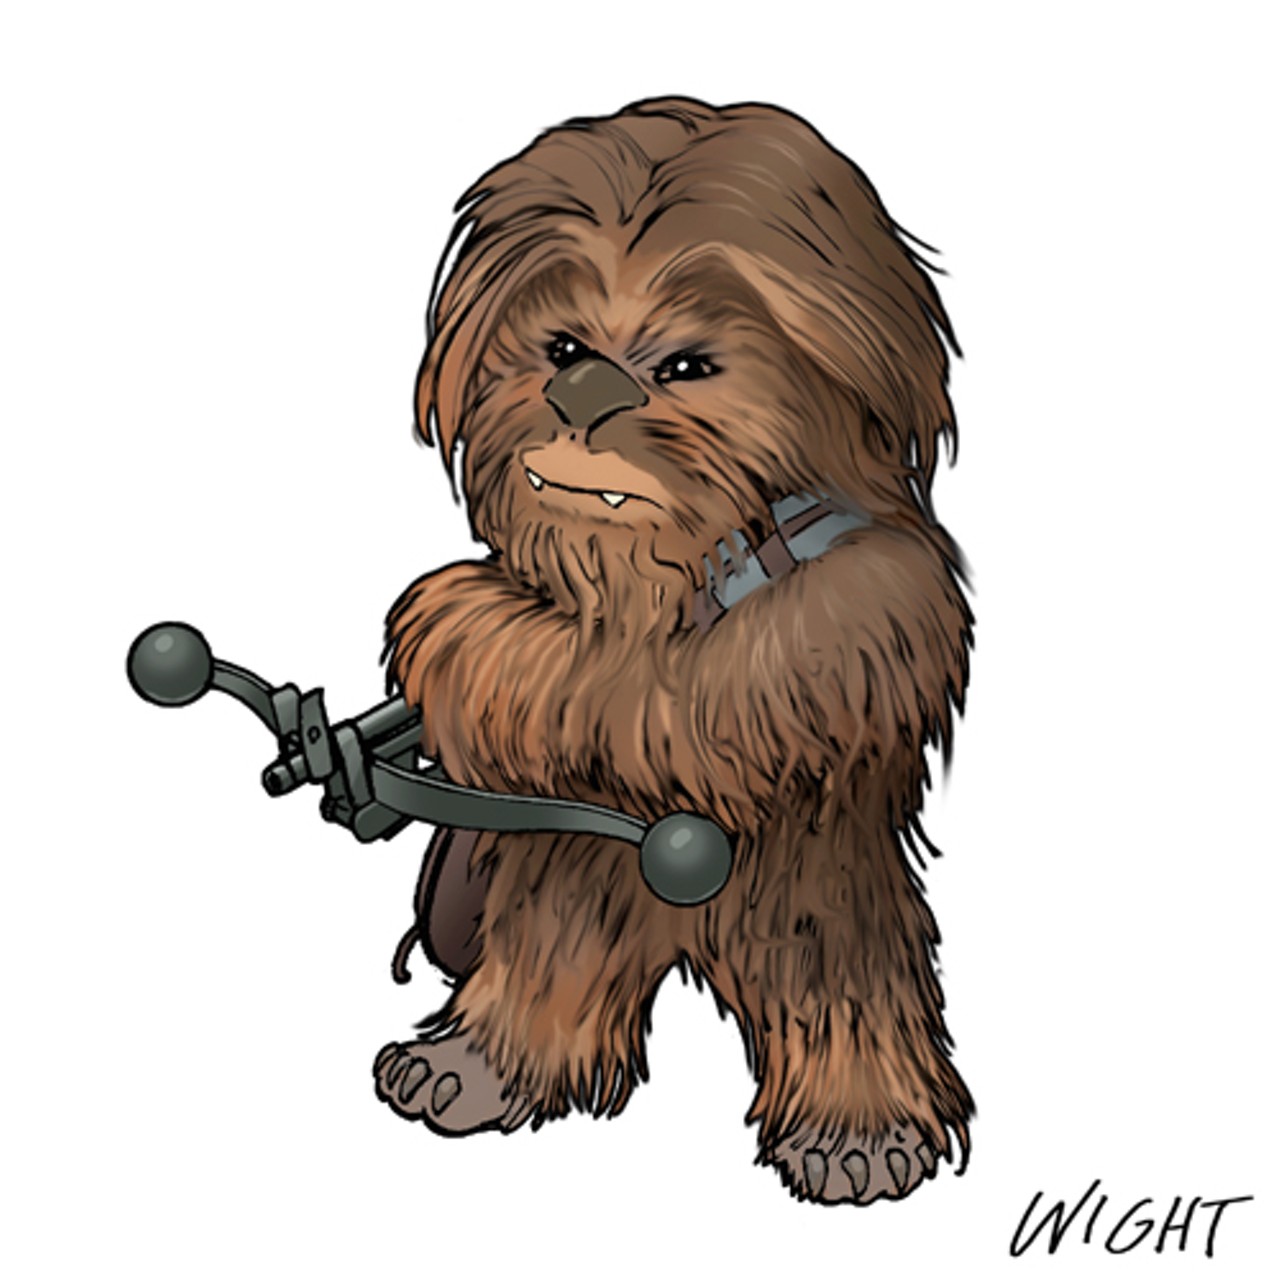 "C Is For Chewie"